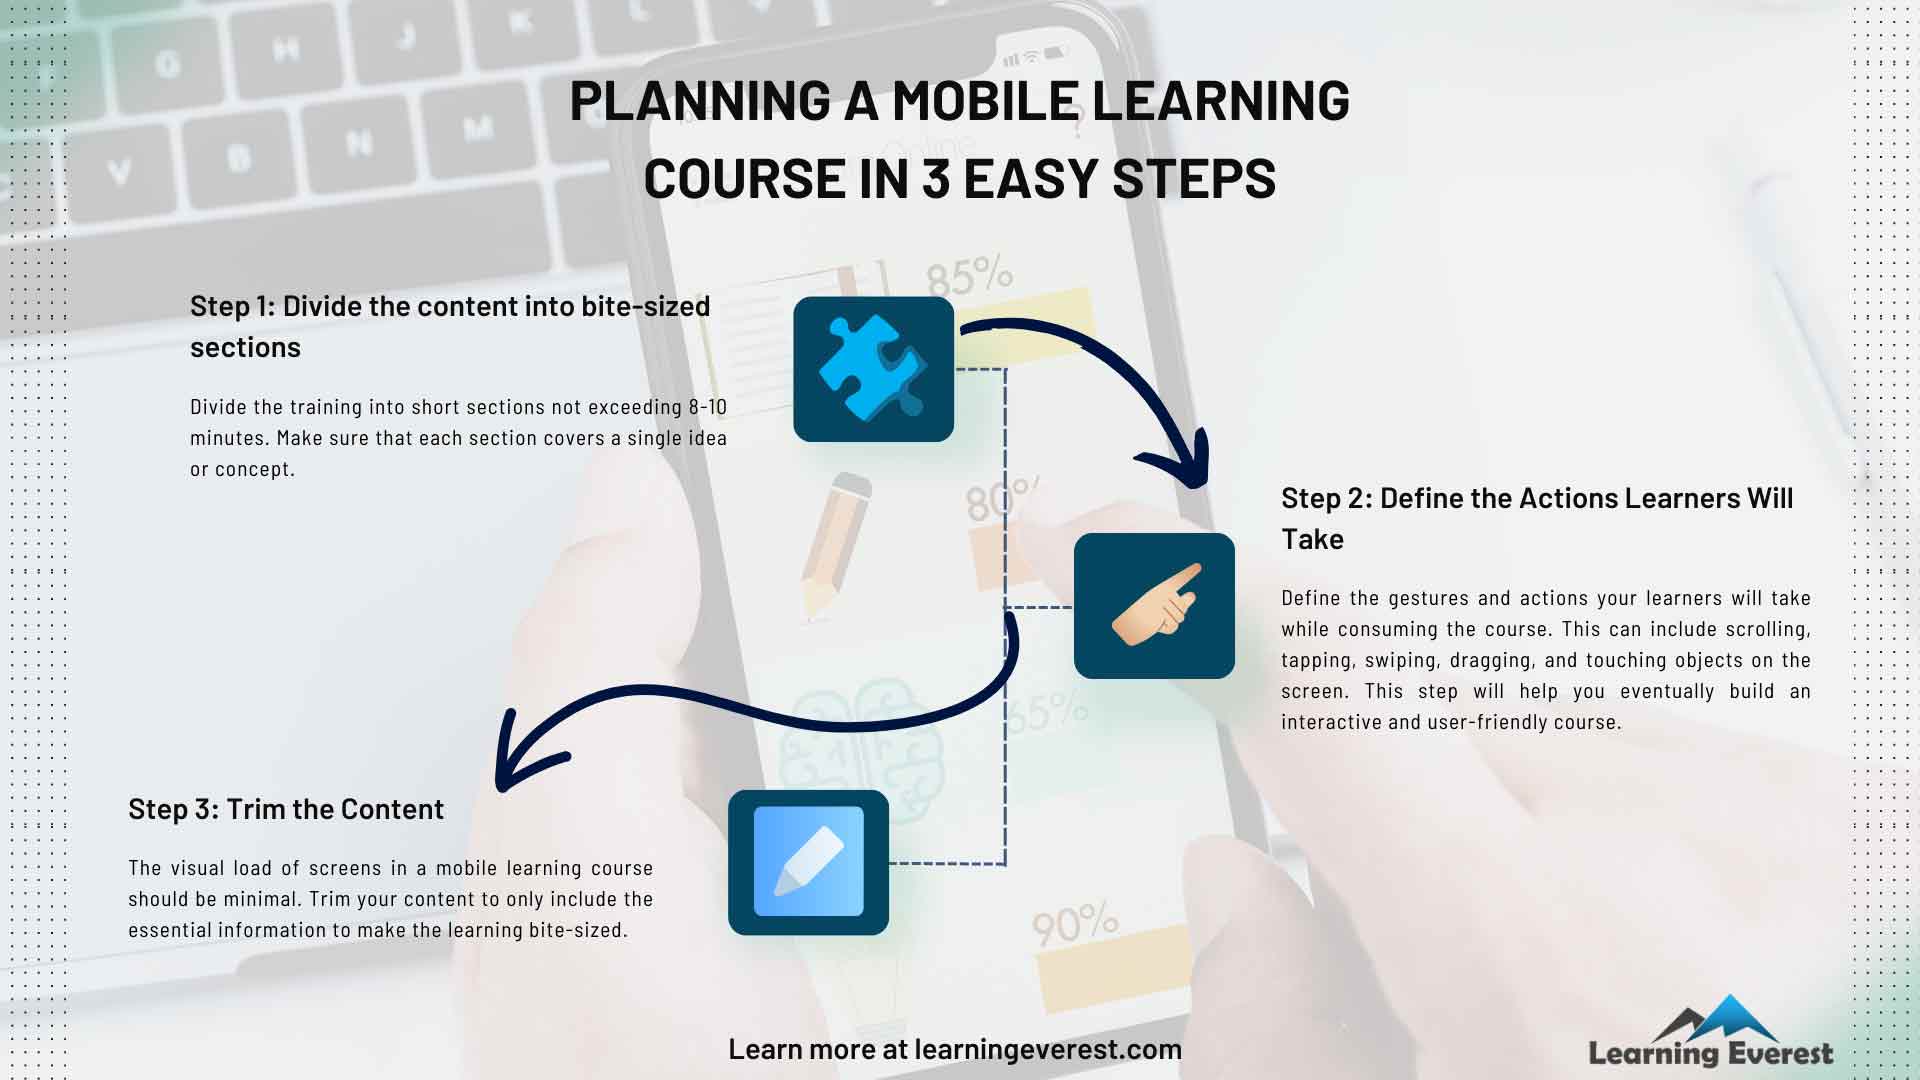 Planning a Mobile Learning Course in 3 Easy Steps